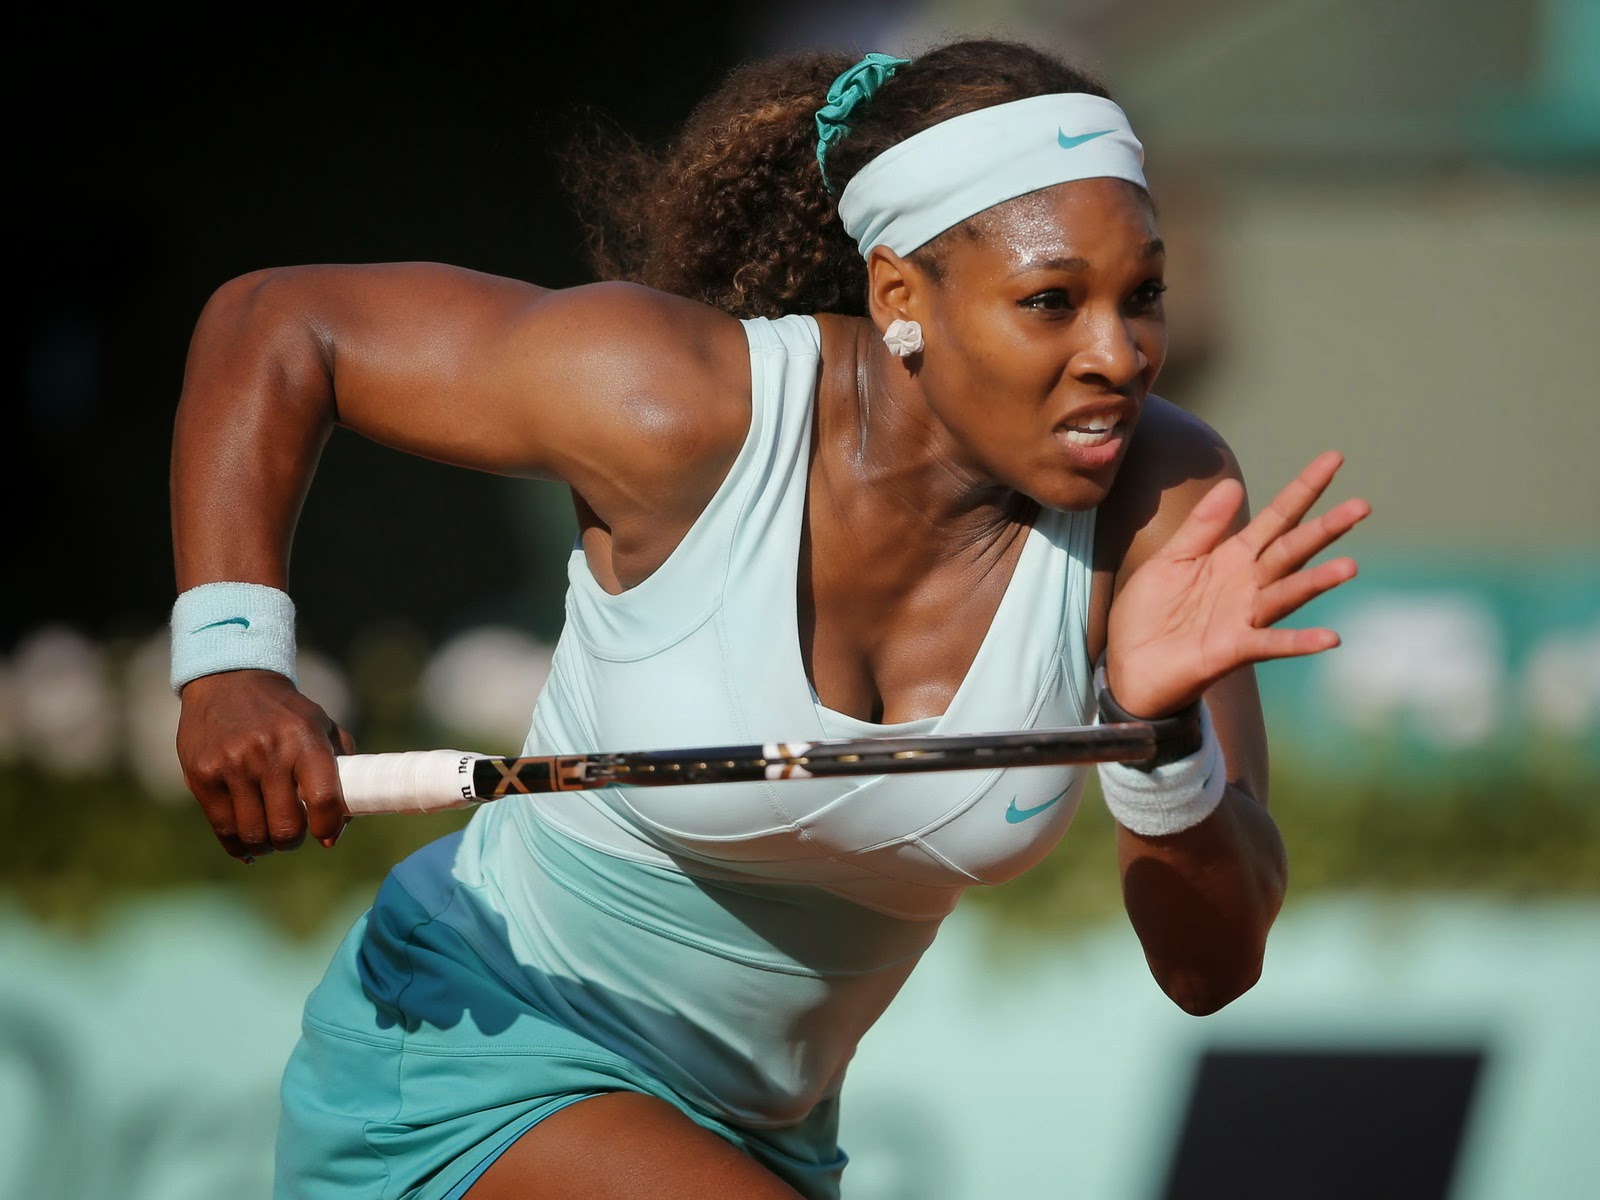 Serena Williams New HD Wallpapers 2014 | Lovely Tennis Stars1600 x 1200